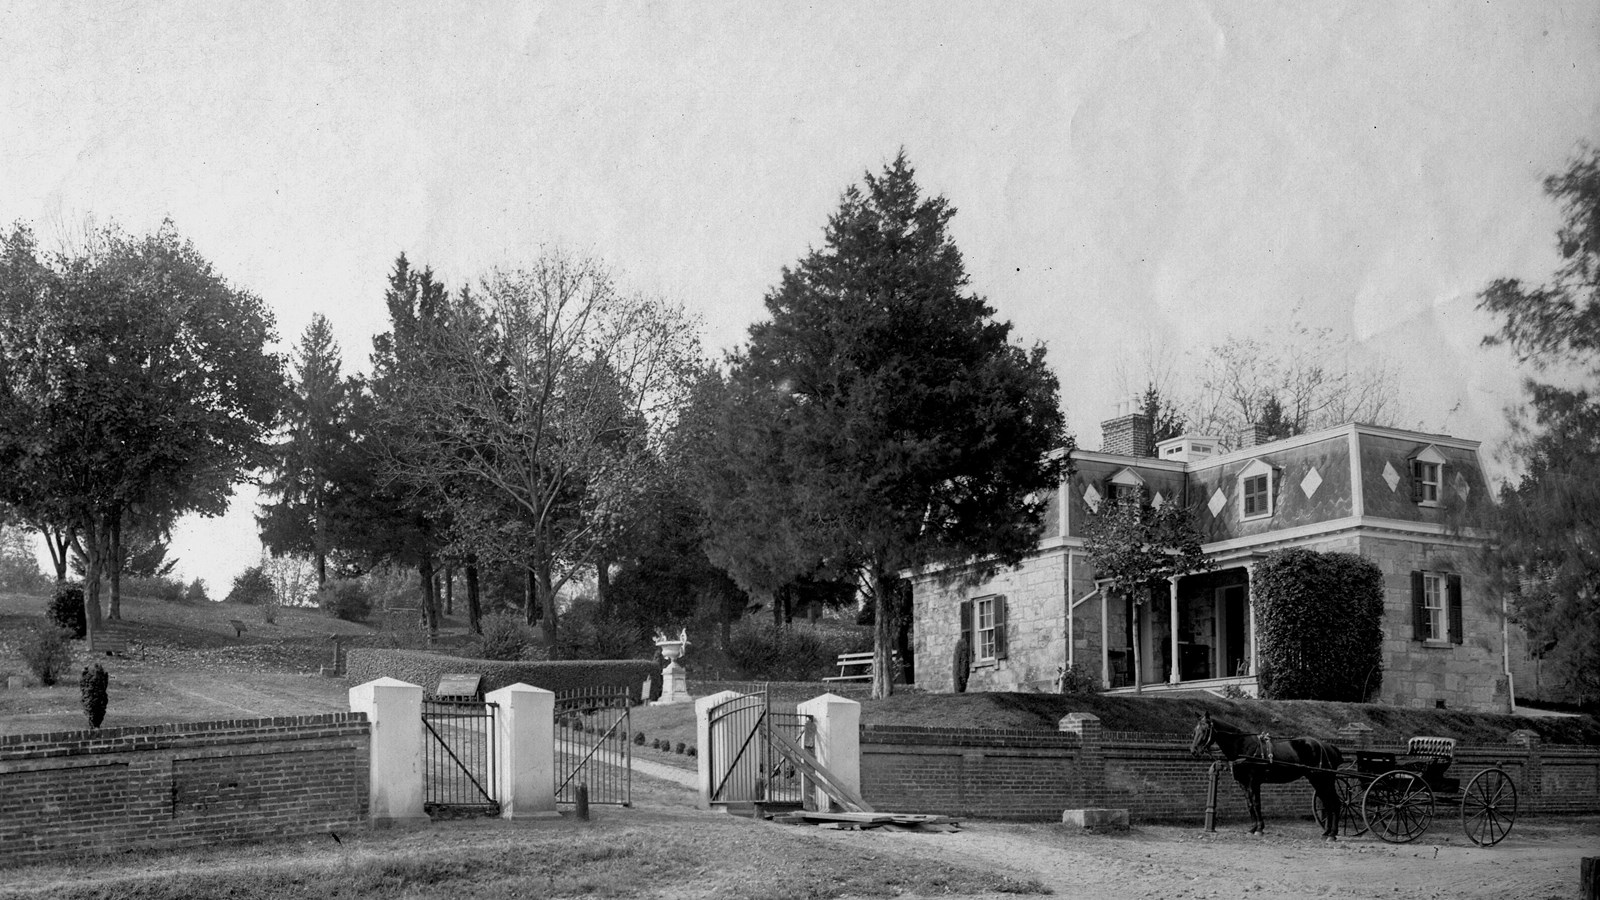 Historical black and white photo of cemetery lodge at gated entrance of cemetery.